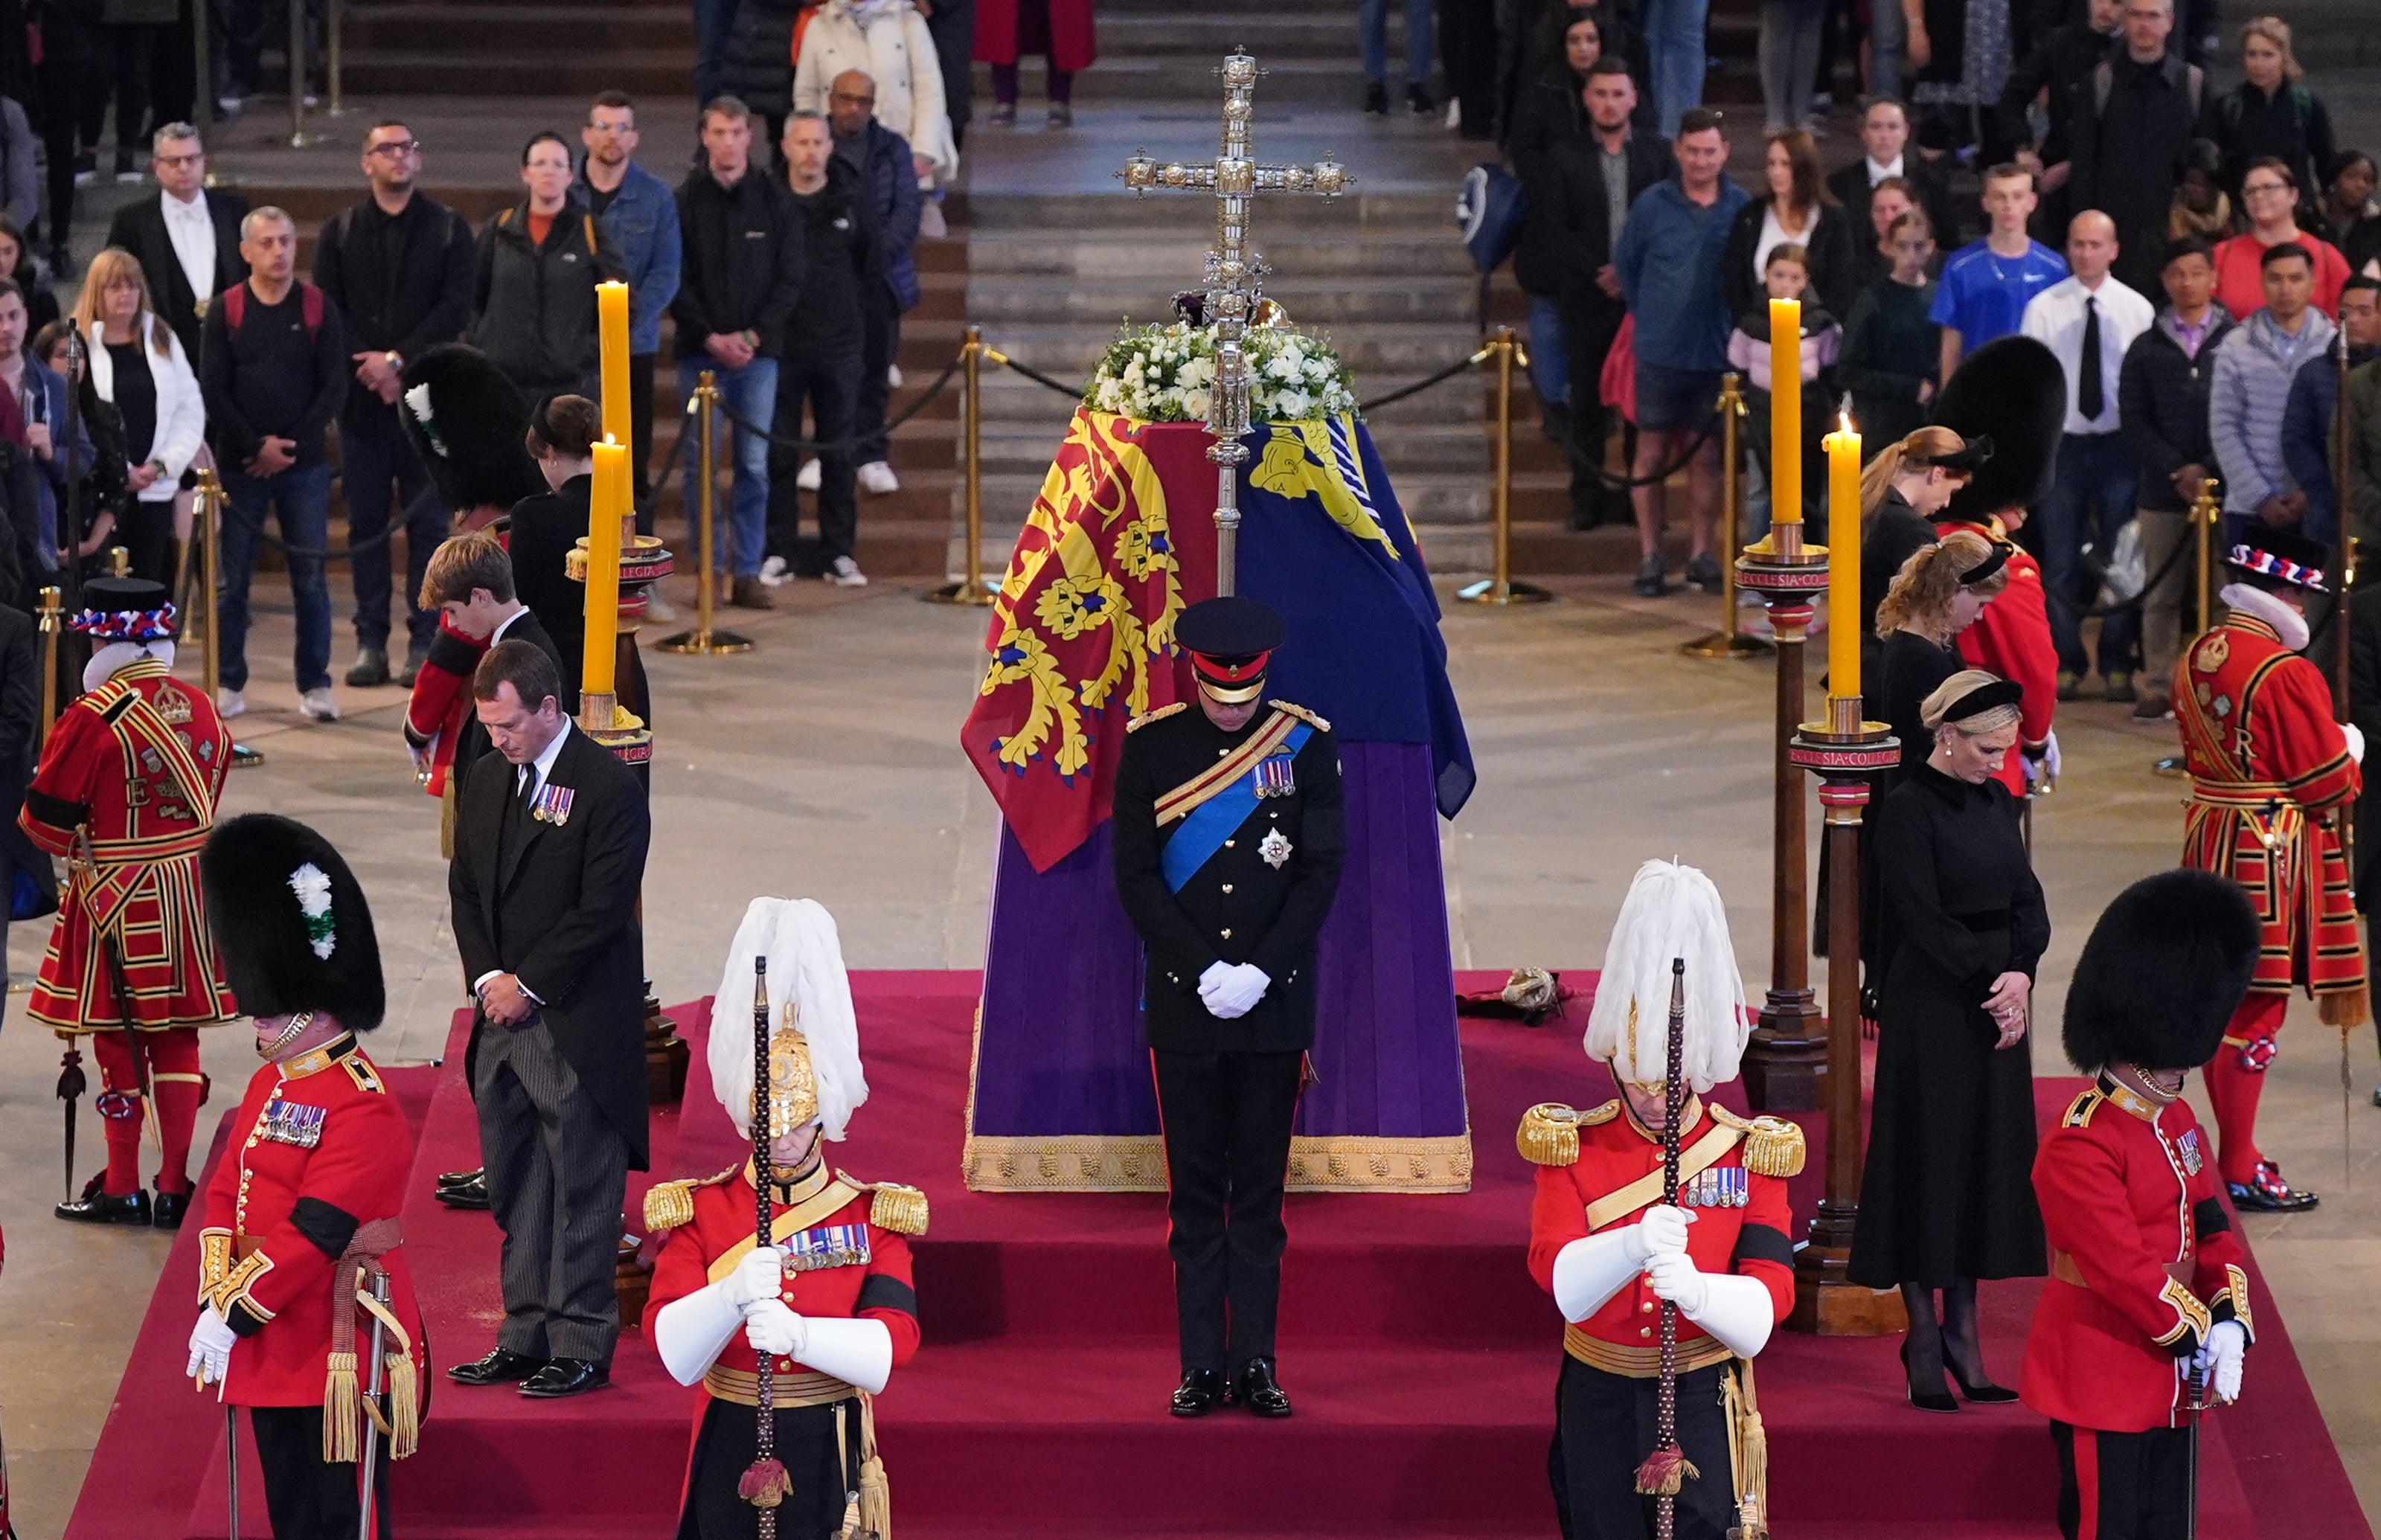 Queen Elizabeth II’s grandchildren hold a vigil beside her coffin as it lies in state on the catafalque in Westminster Hall (Yui Mok/PA)